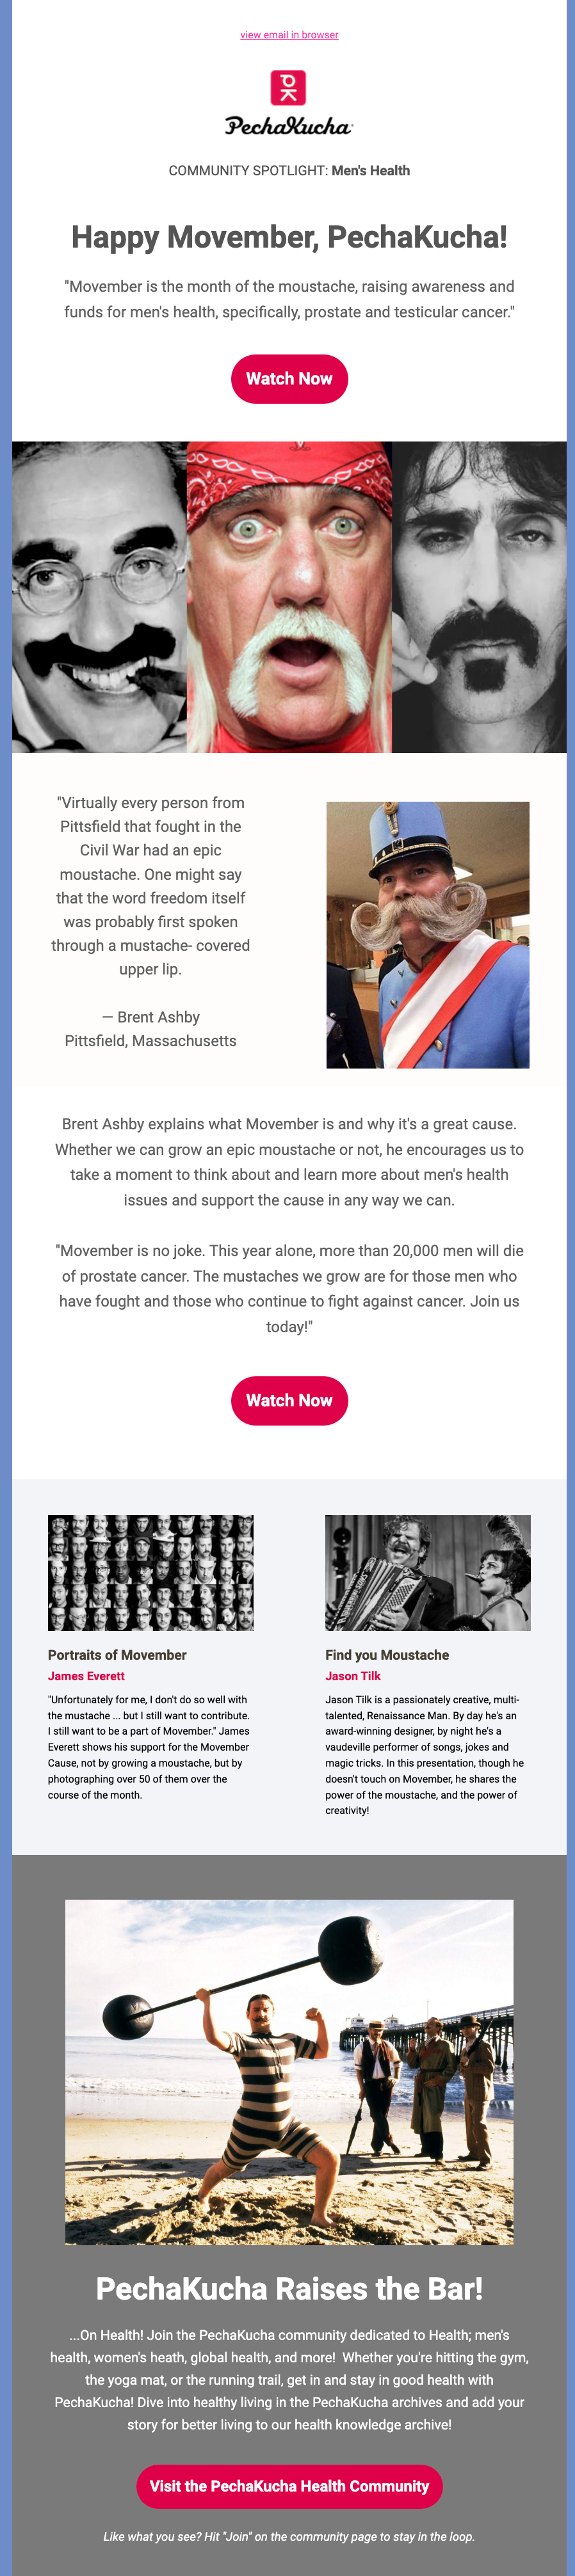 Movember newsletter example from Pecha Kucha with historical imagery of moustaches